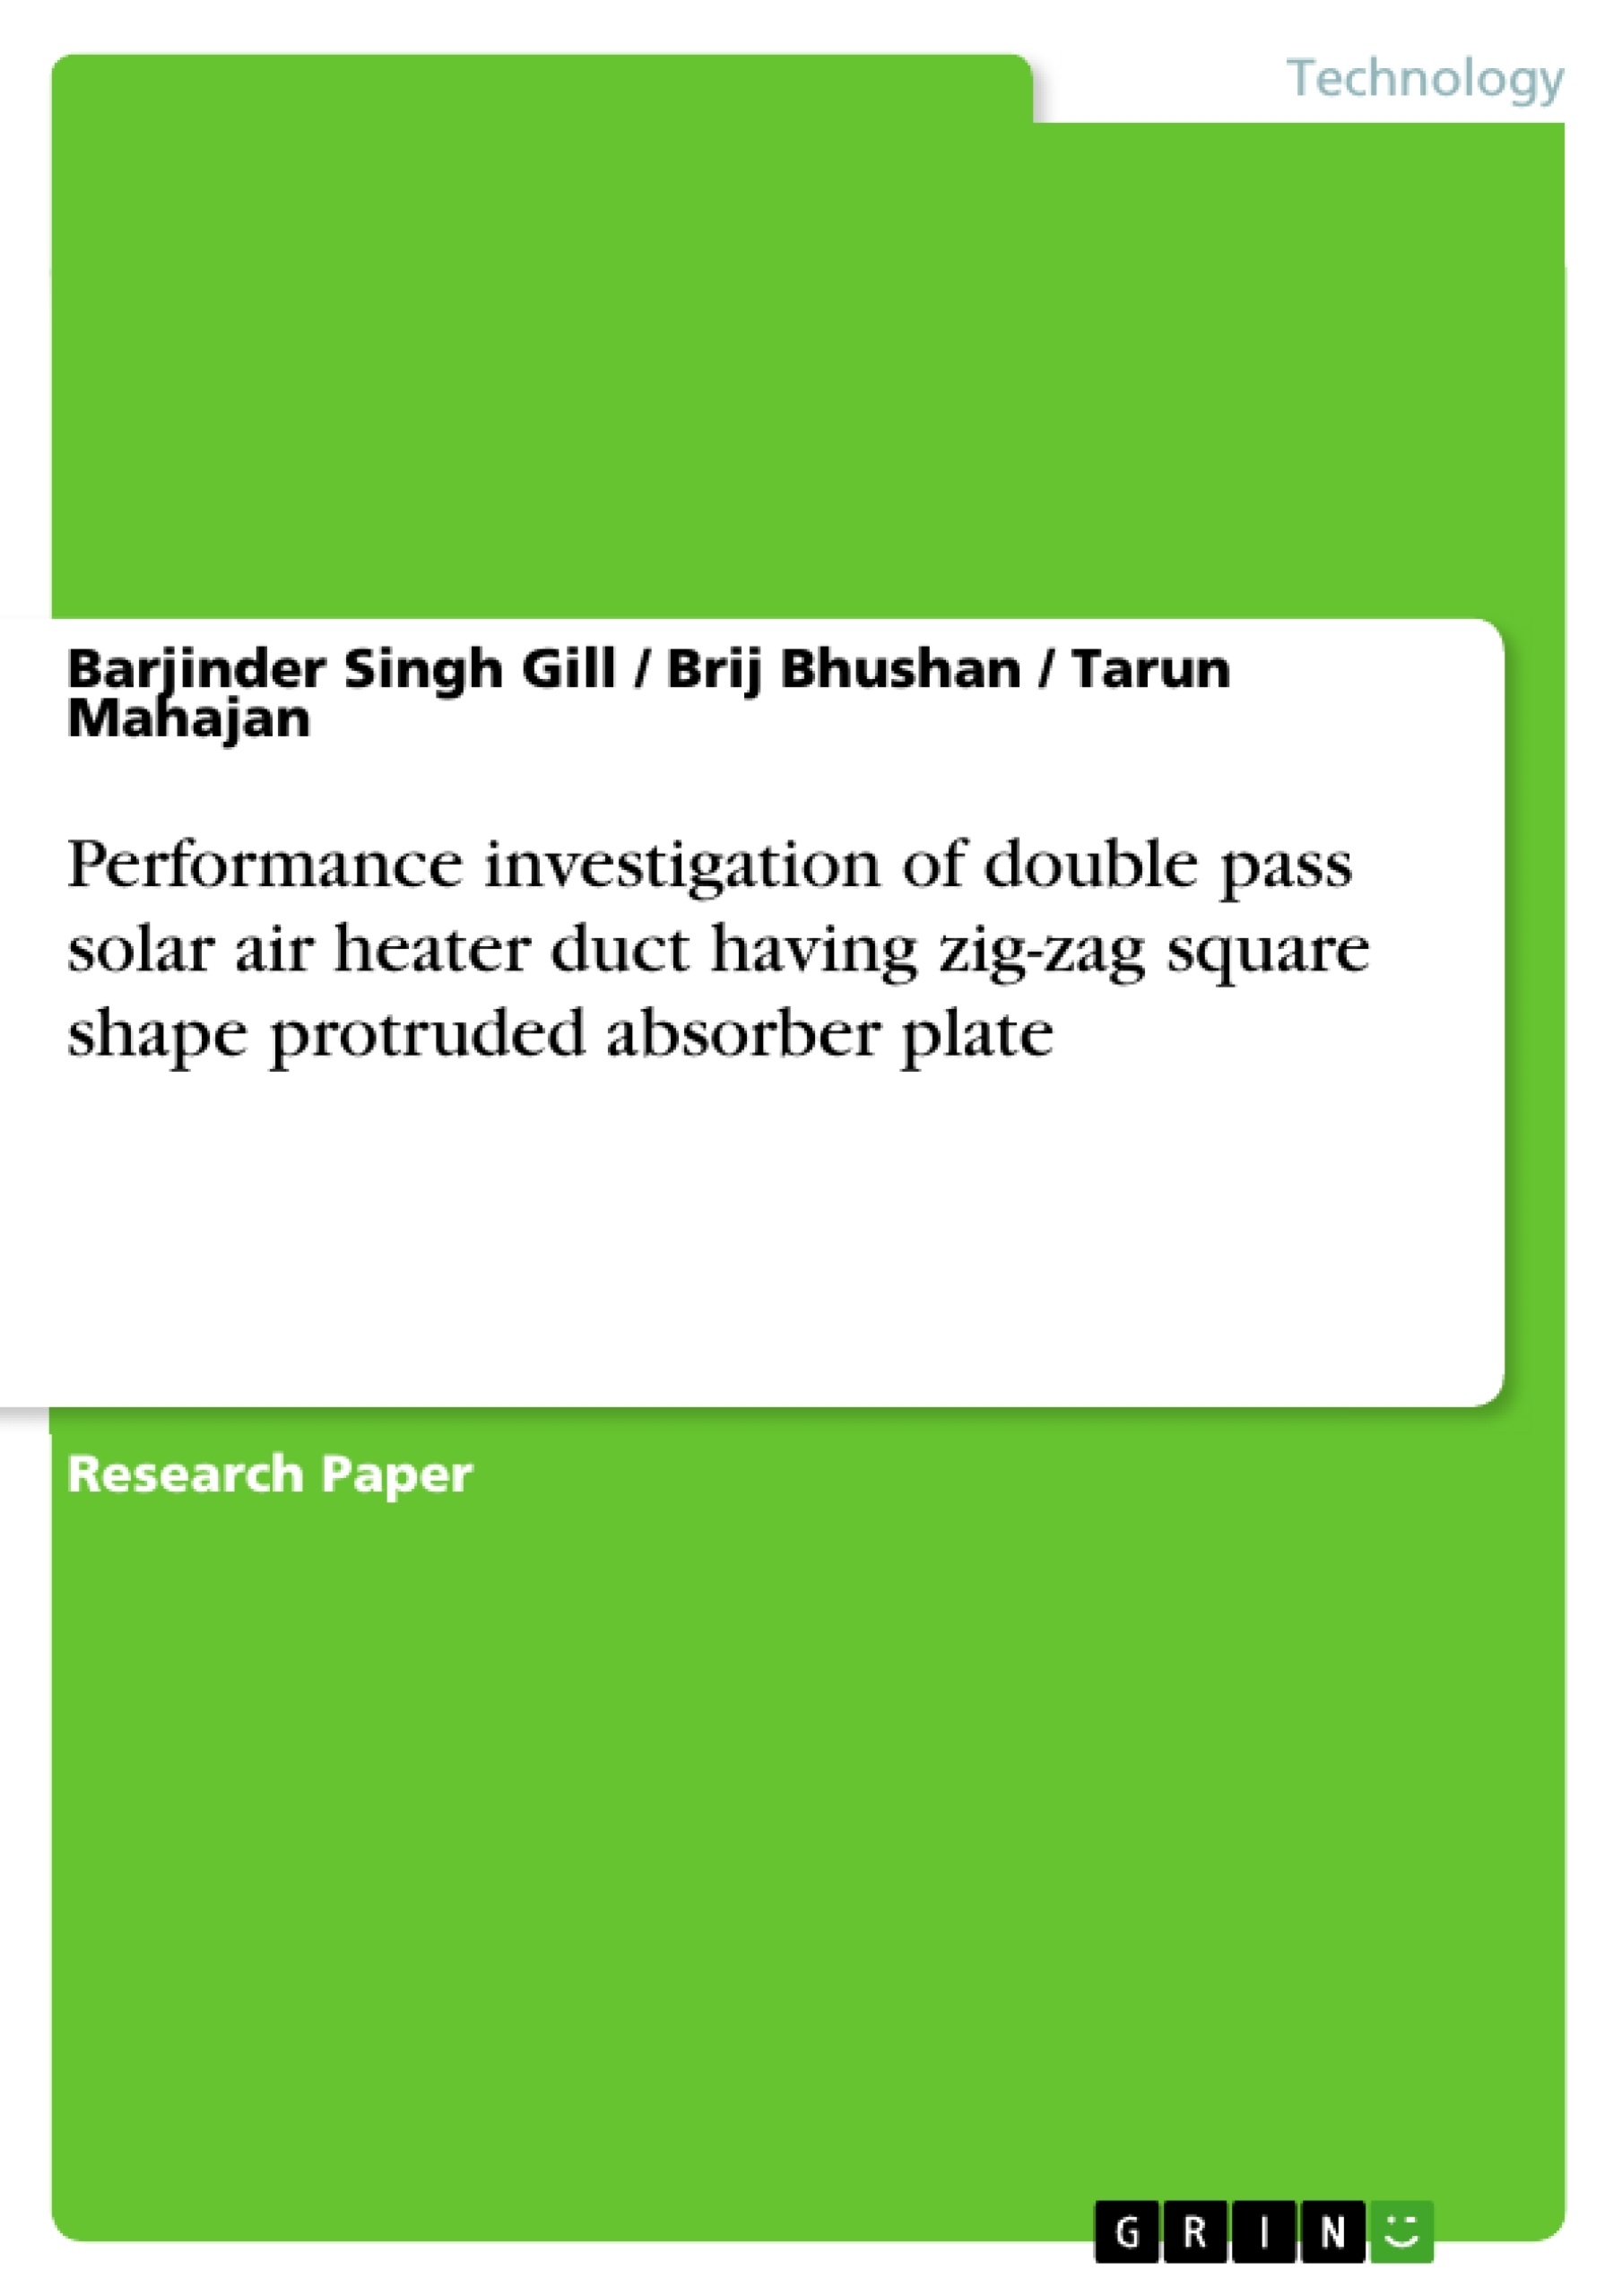 Titel: Performance investigation of double pass solar air heater duct having zig-zag square shape protruded absorber plate